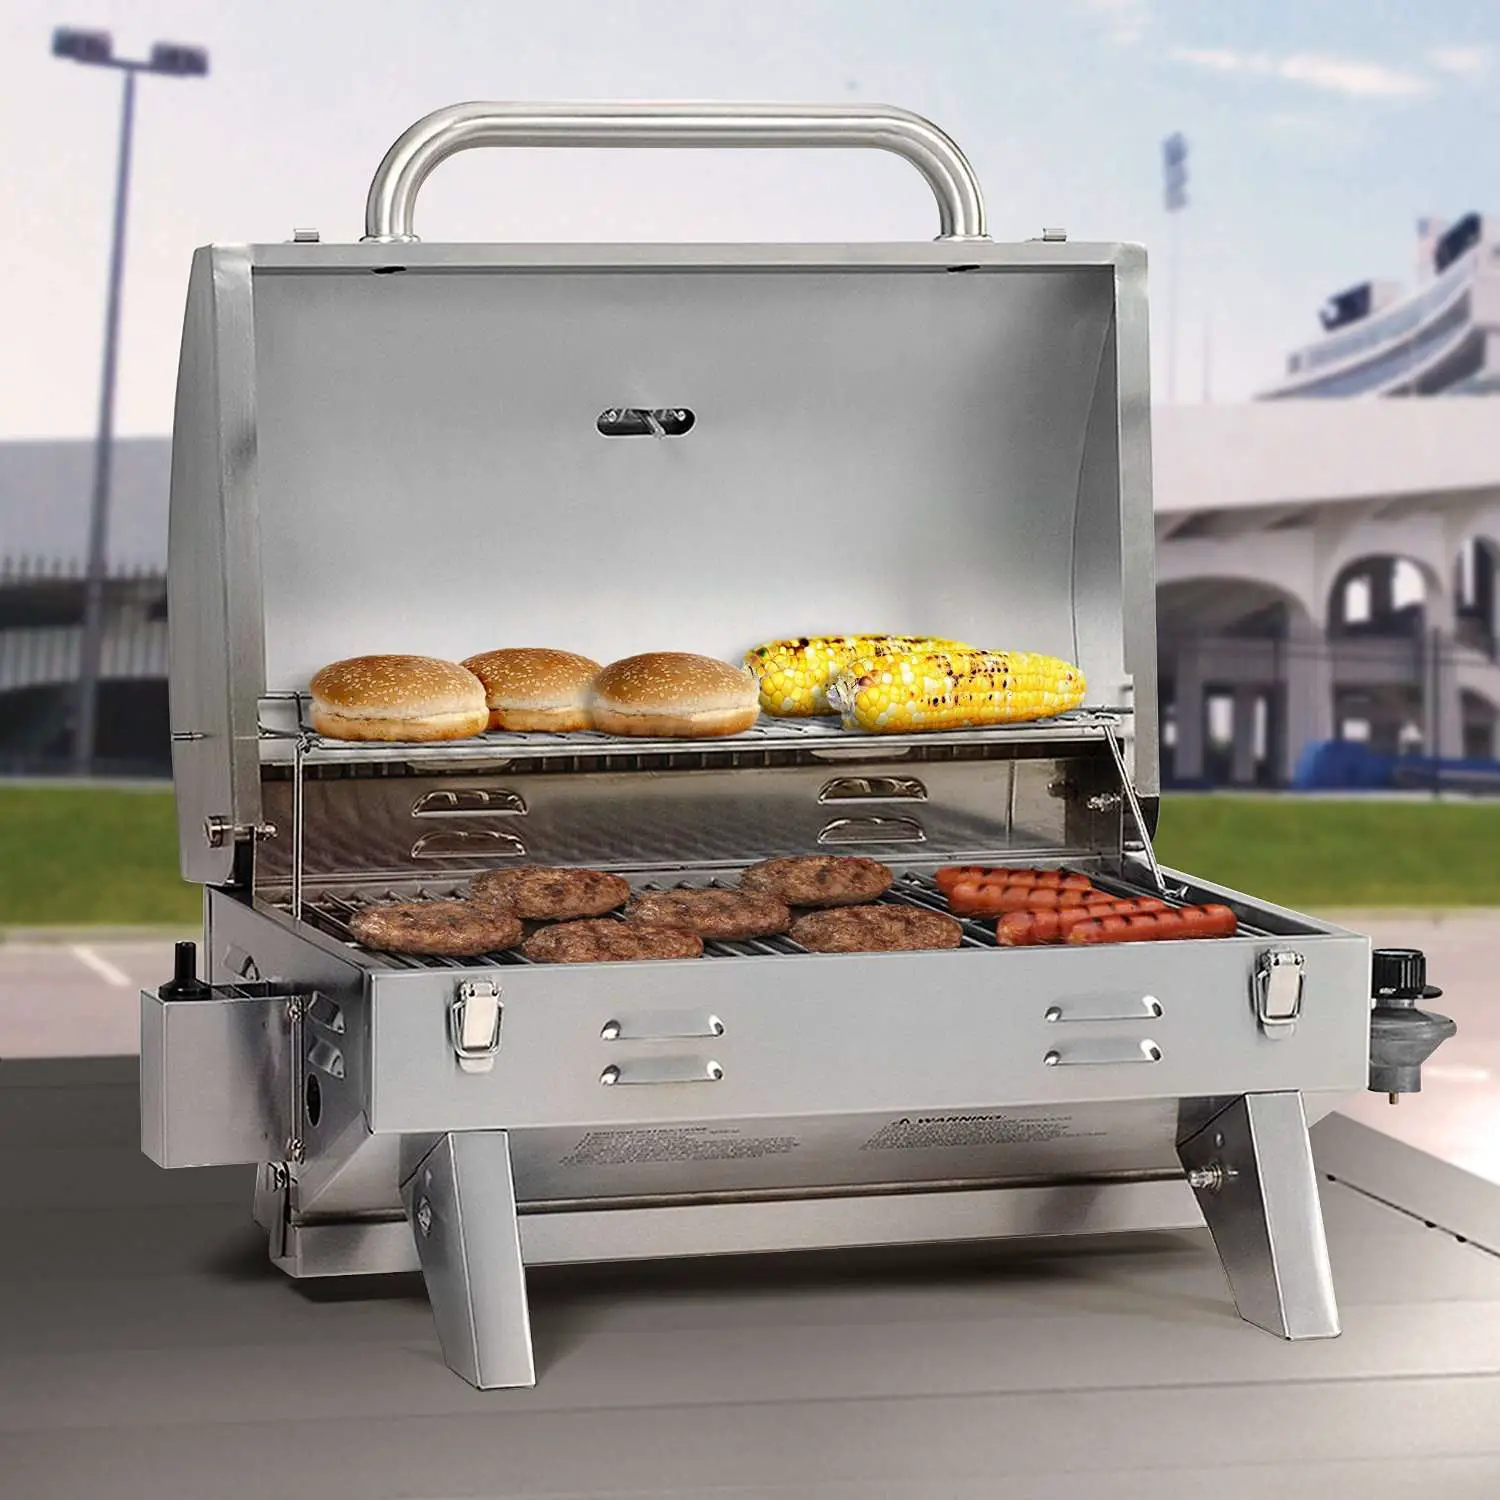 Aussie 205 Stainless Steel Tabletop Gas Grill Review ...